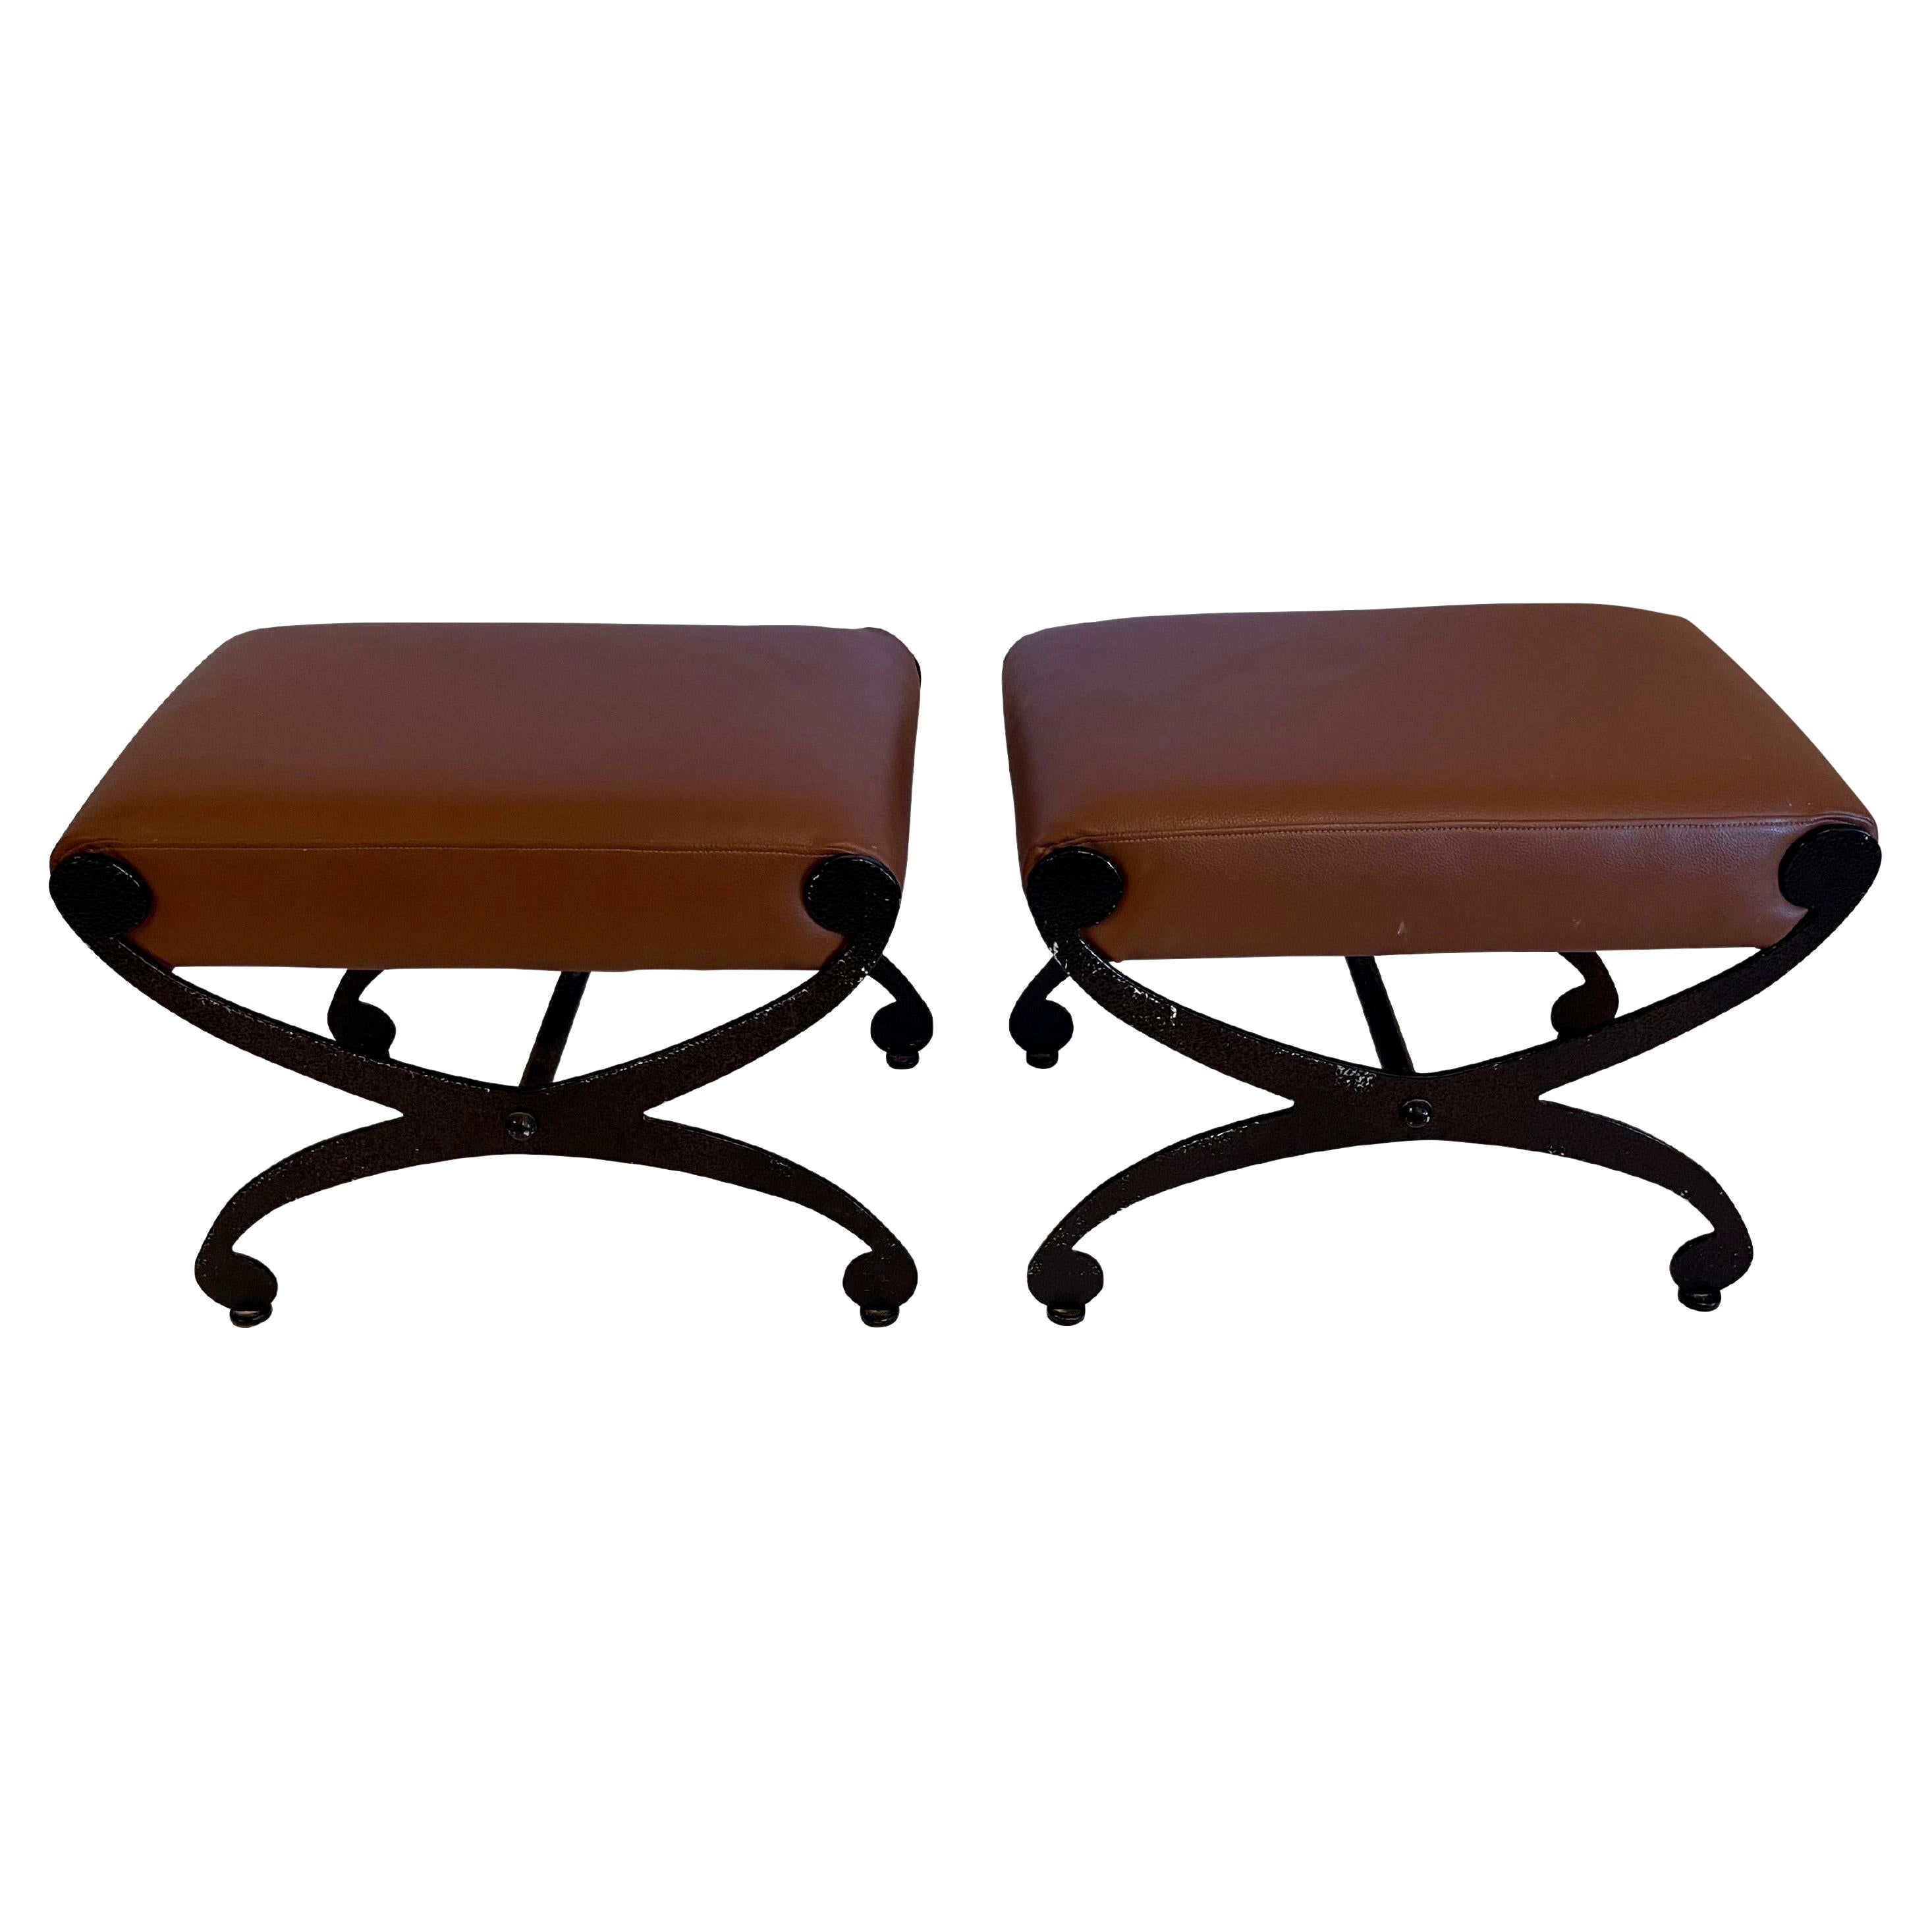 Pair of Stylish Black Iron and Tan Leather Benches For Sale